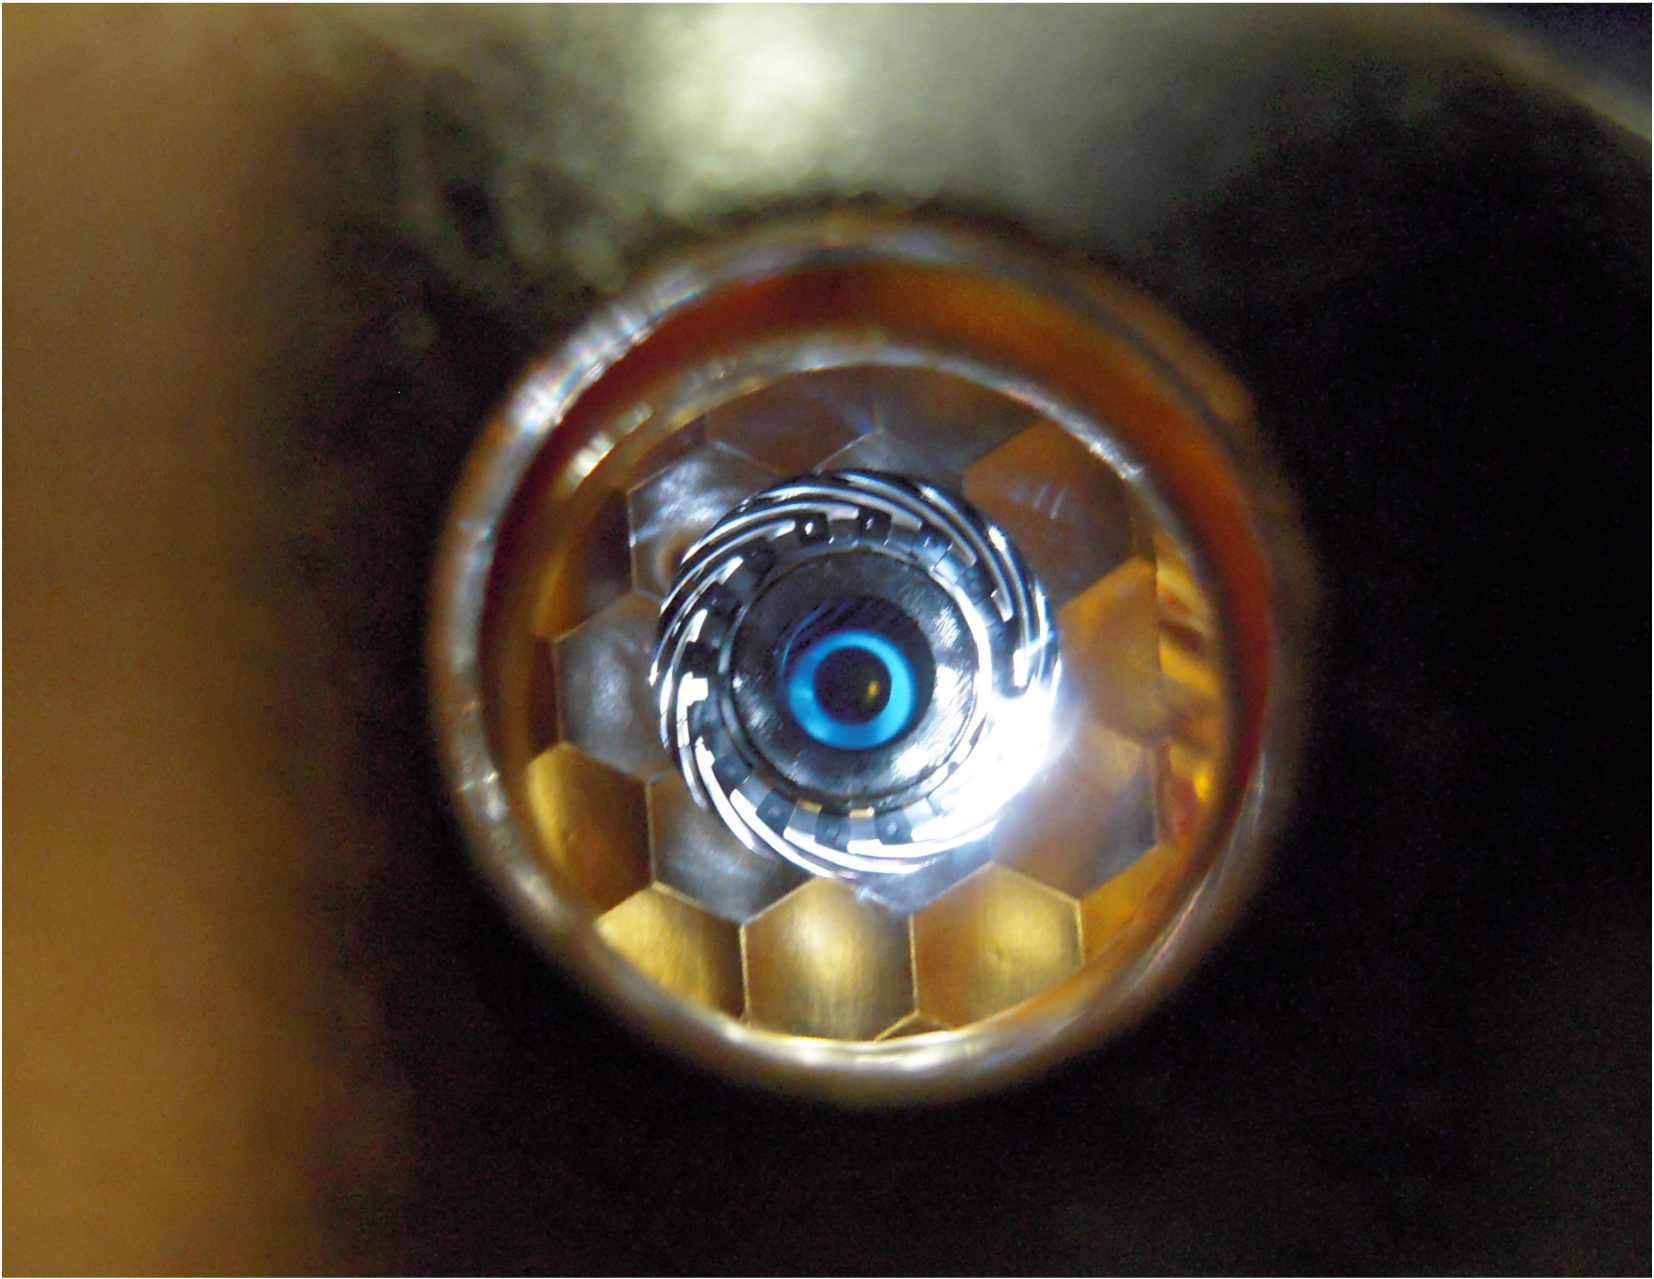 A laser's view of the interior of a hohlraum, the capsule at the ignition point of the fusion reaction.